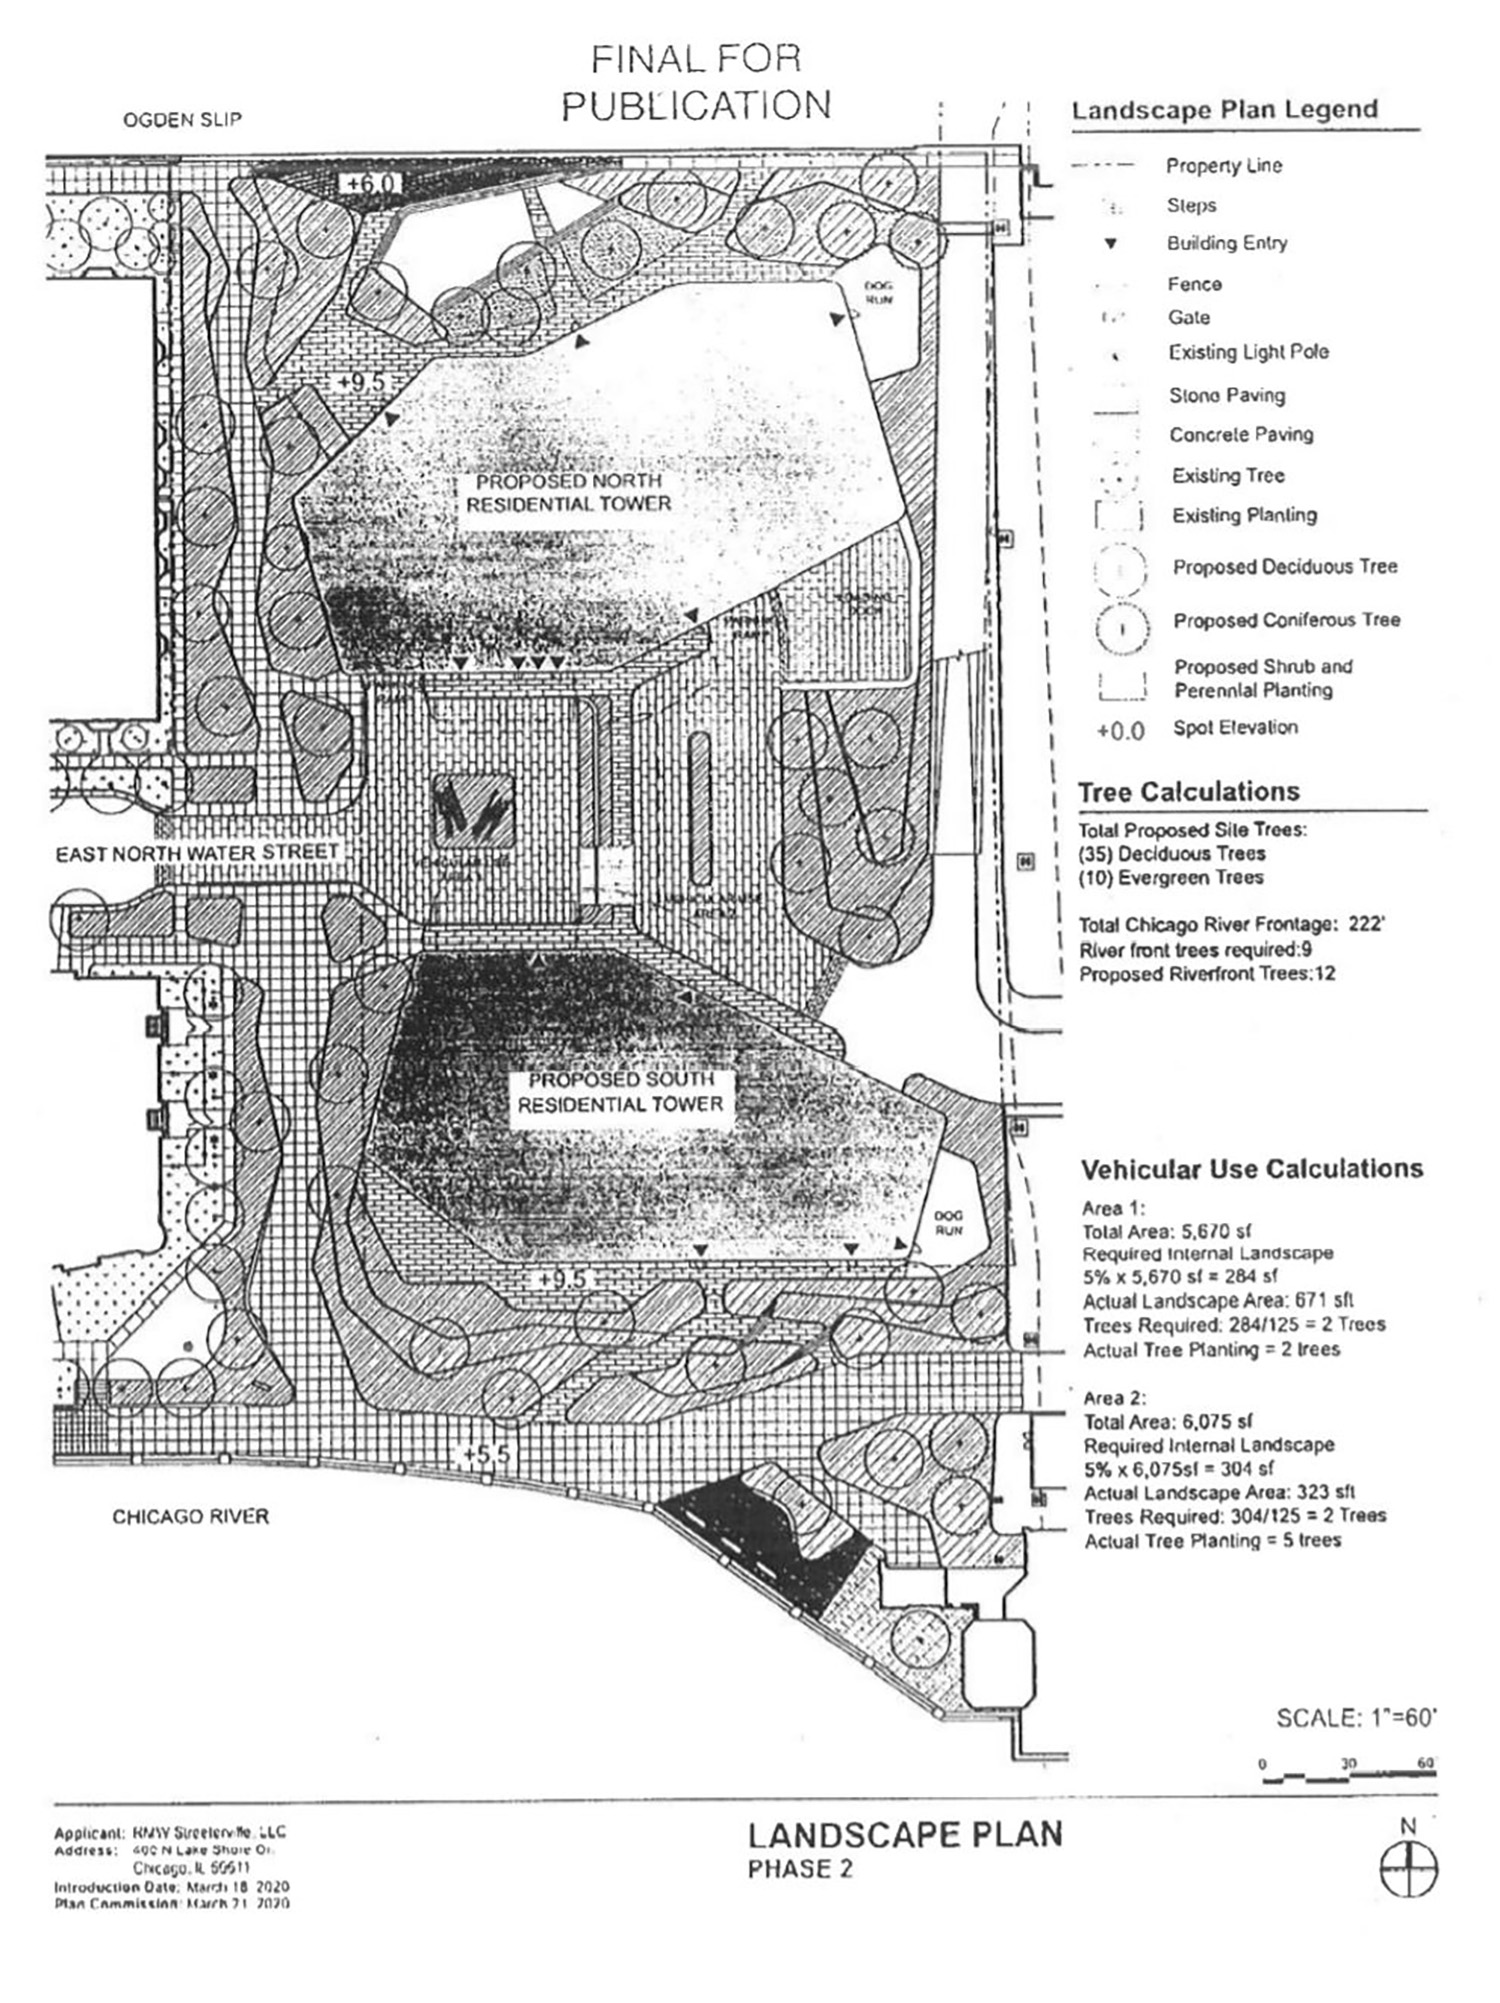 400 N Lake Shore Drive Phase 2 Site Plan. Drawing by SOM